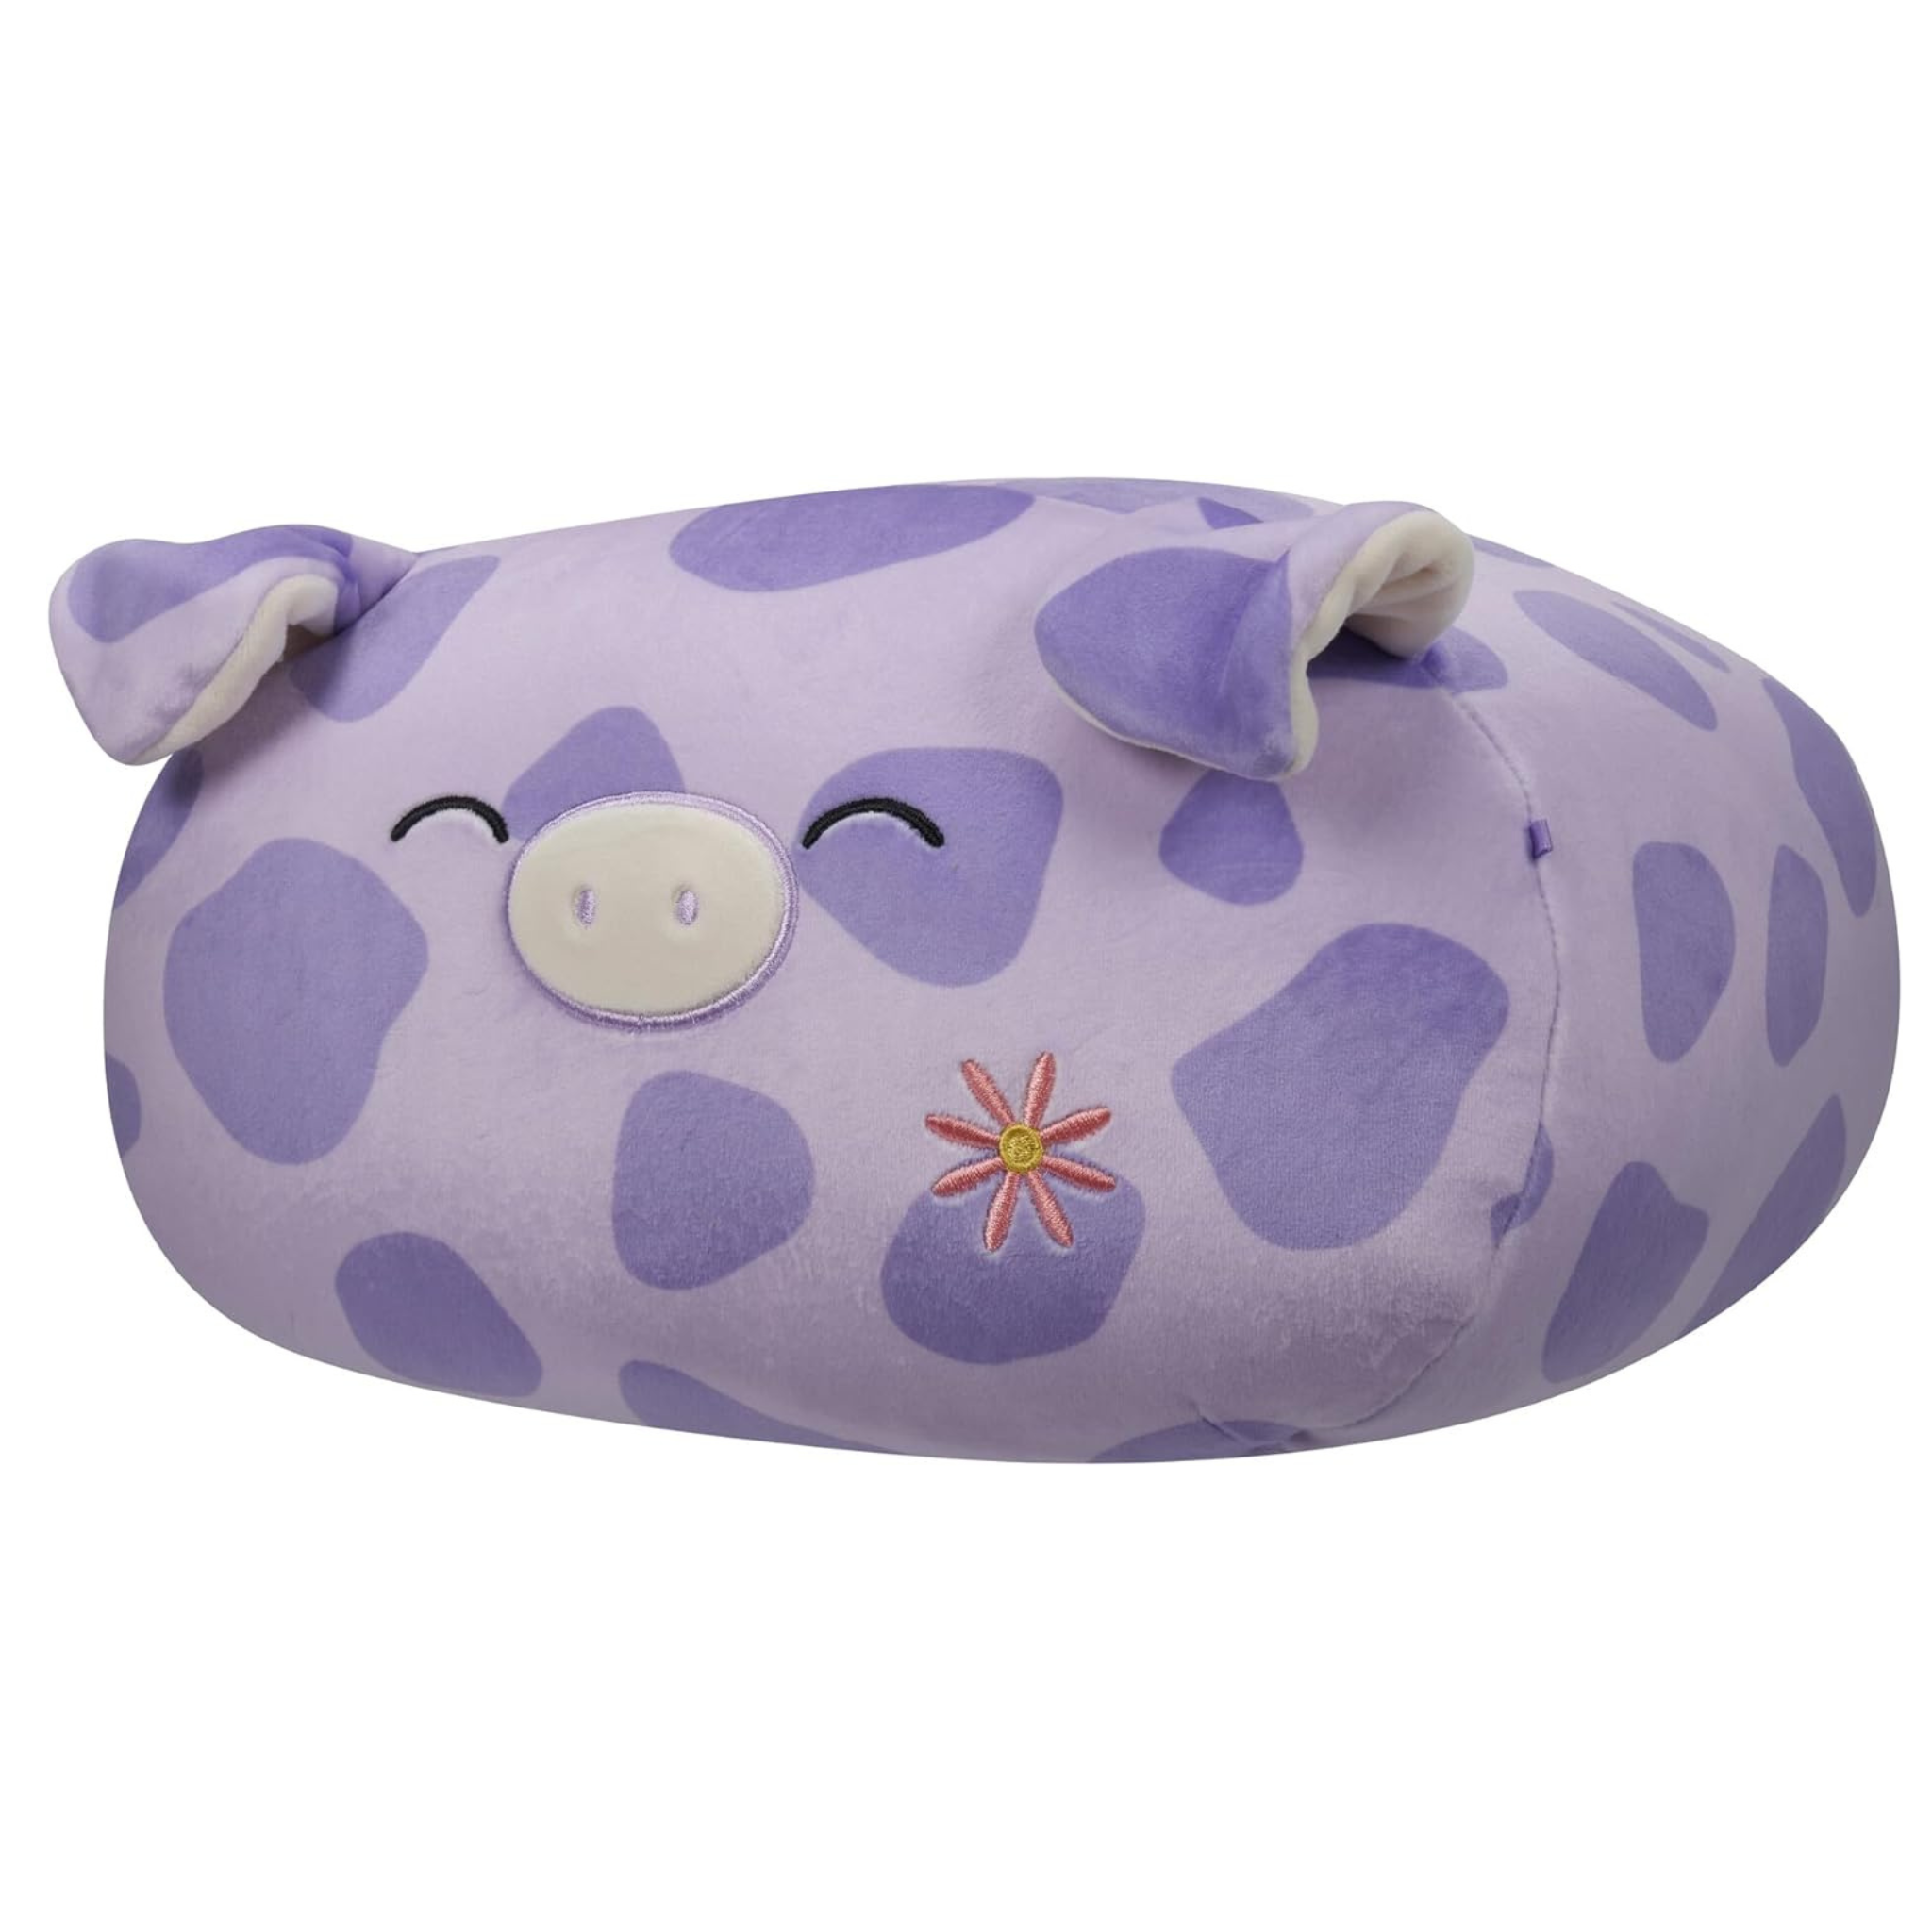 Squishmallows Stackables Original 12-Inch Pammy Pig with Flower Embroidery